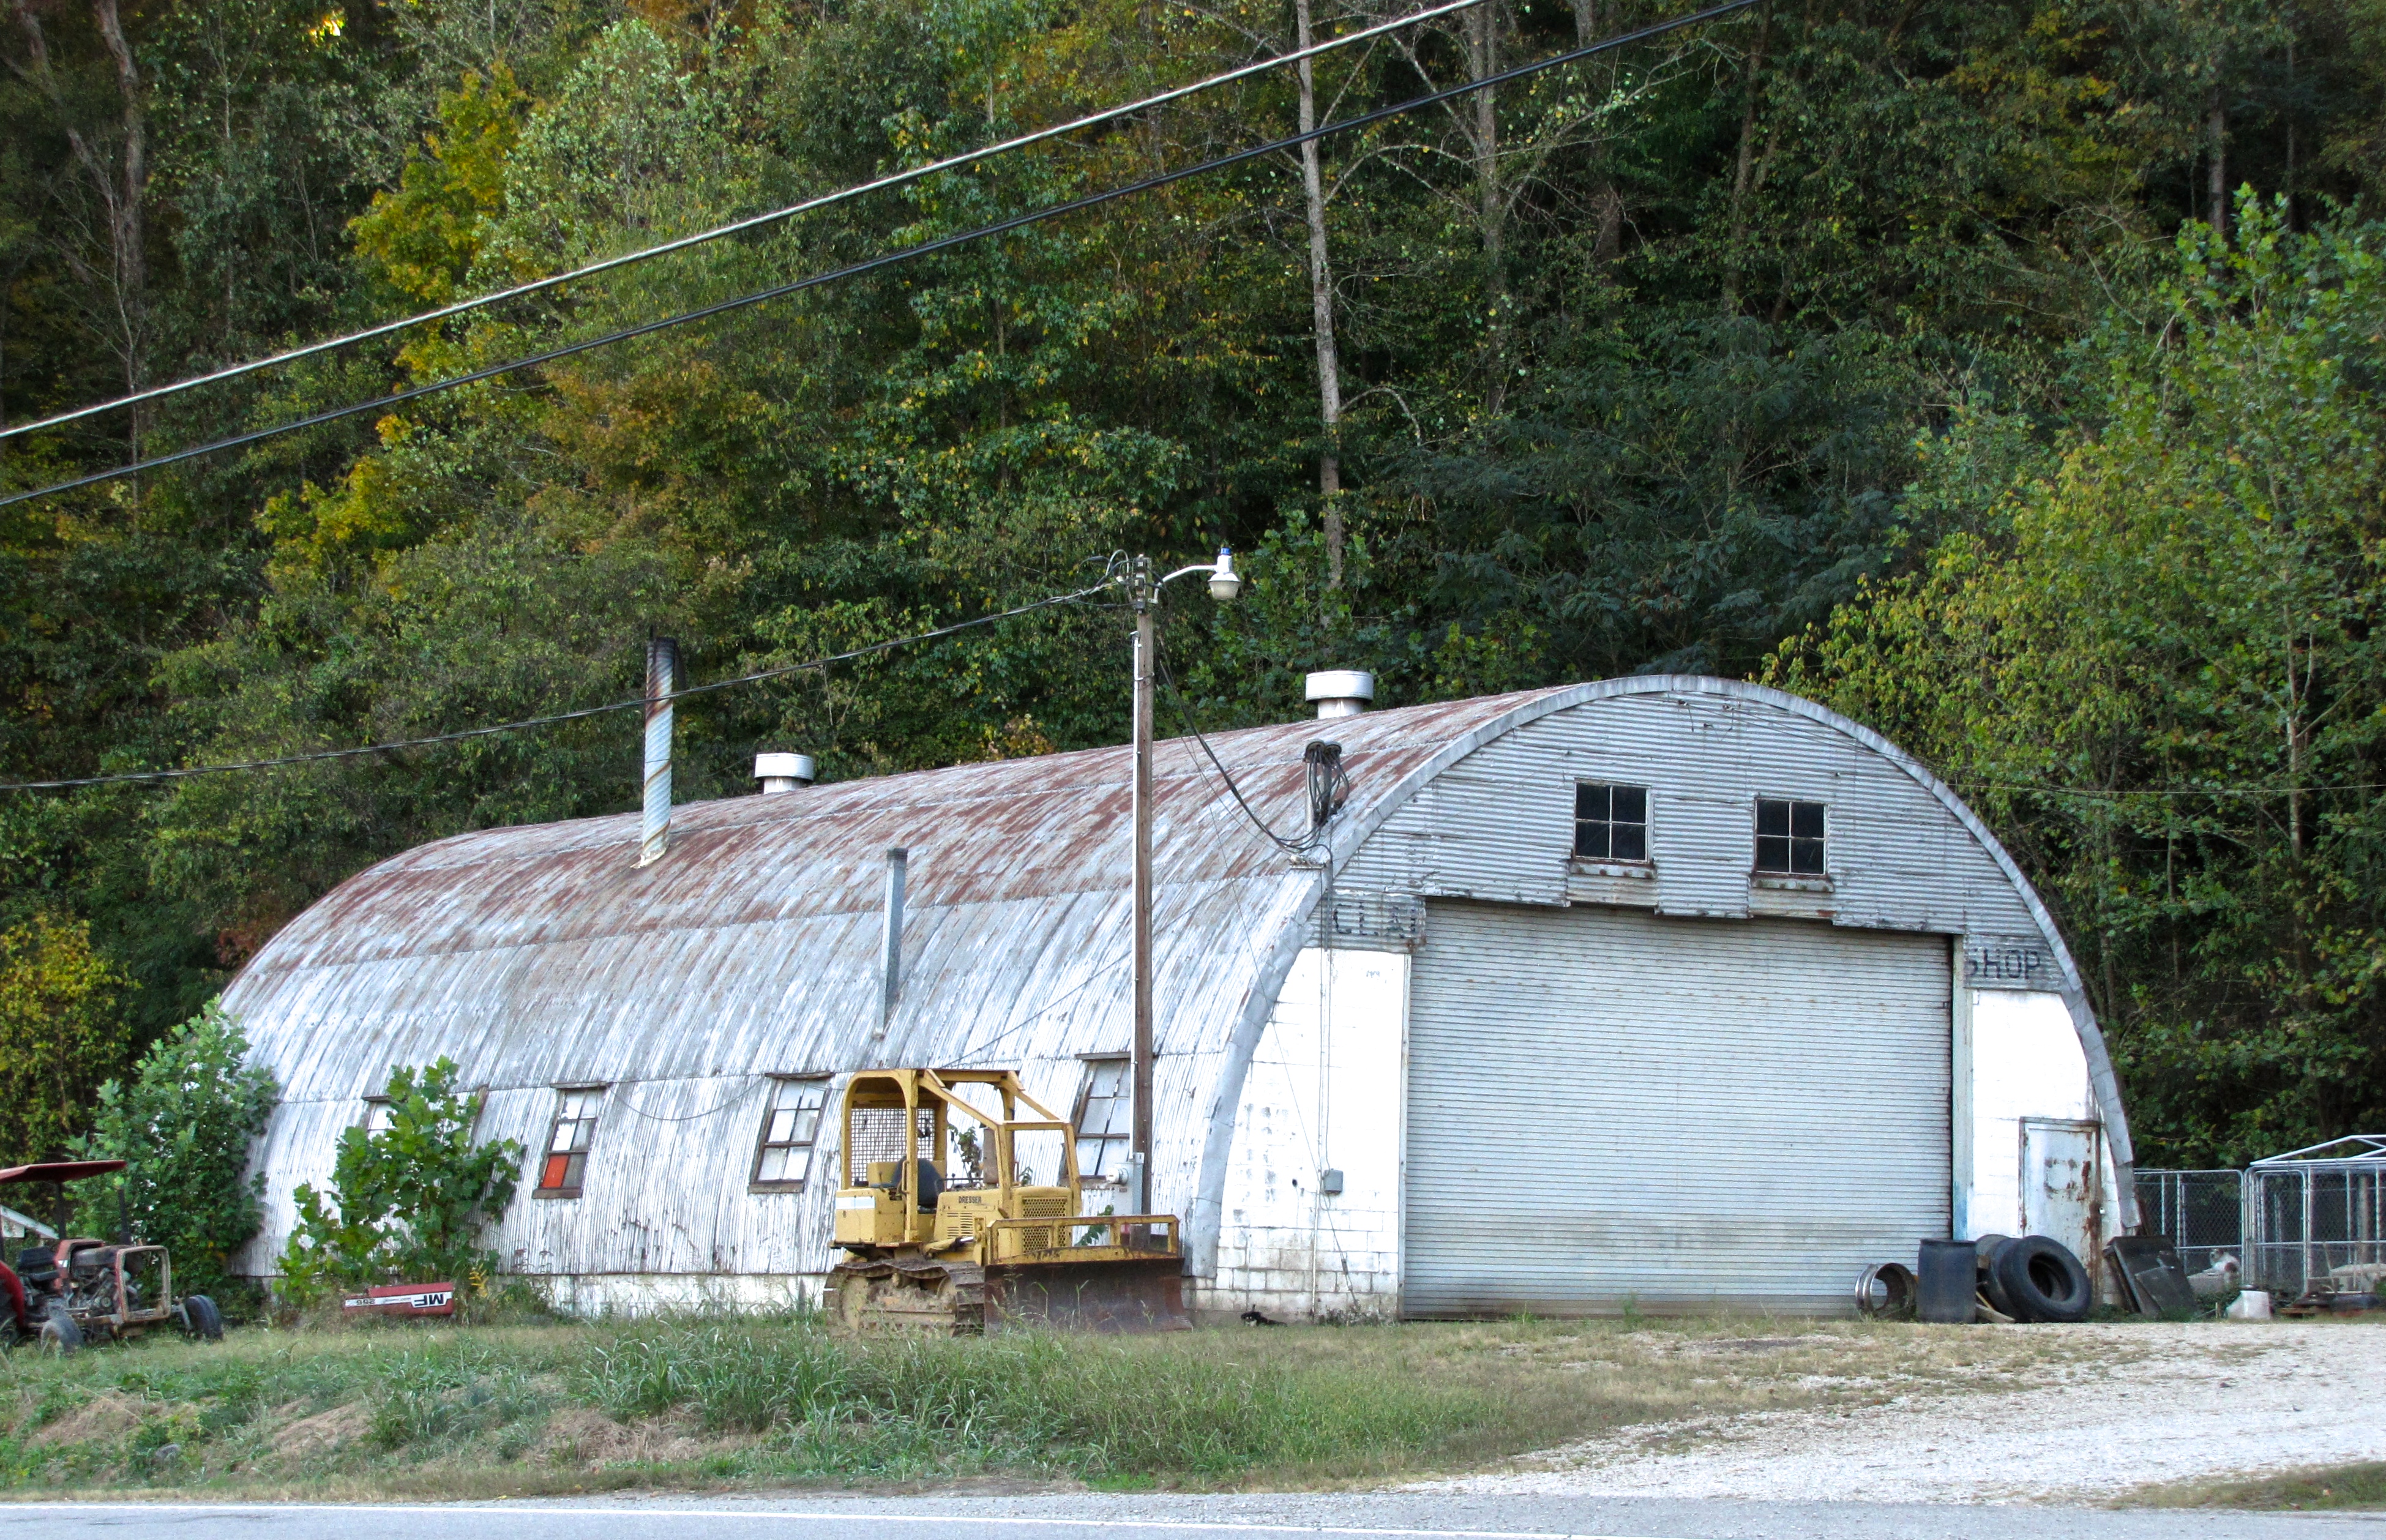 quonset hut in Greendale, WI